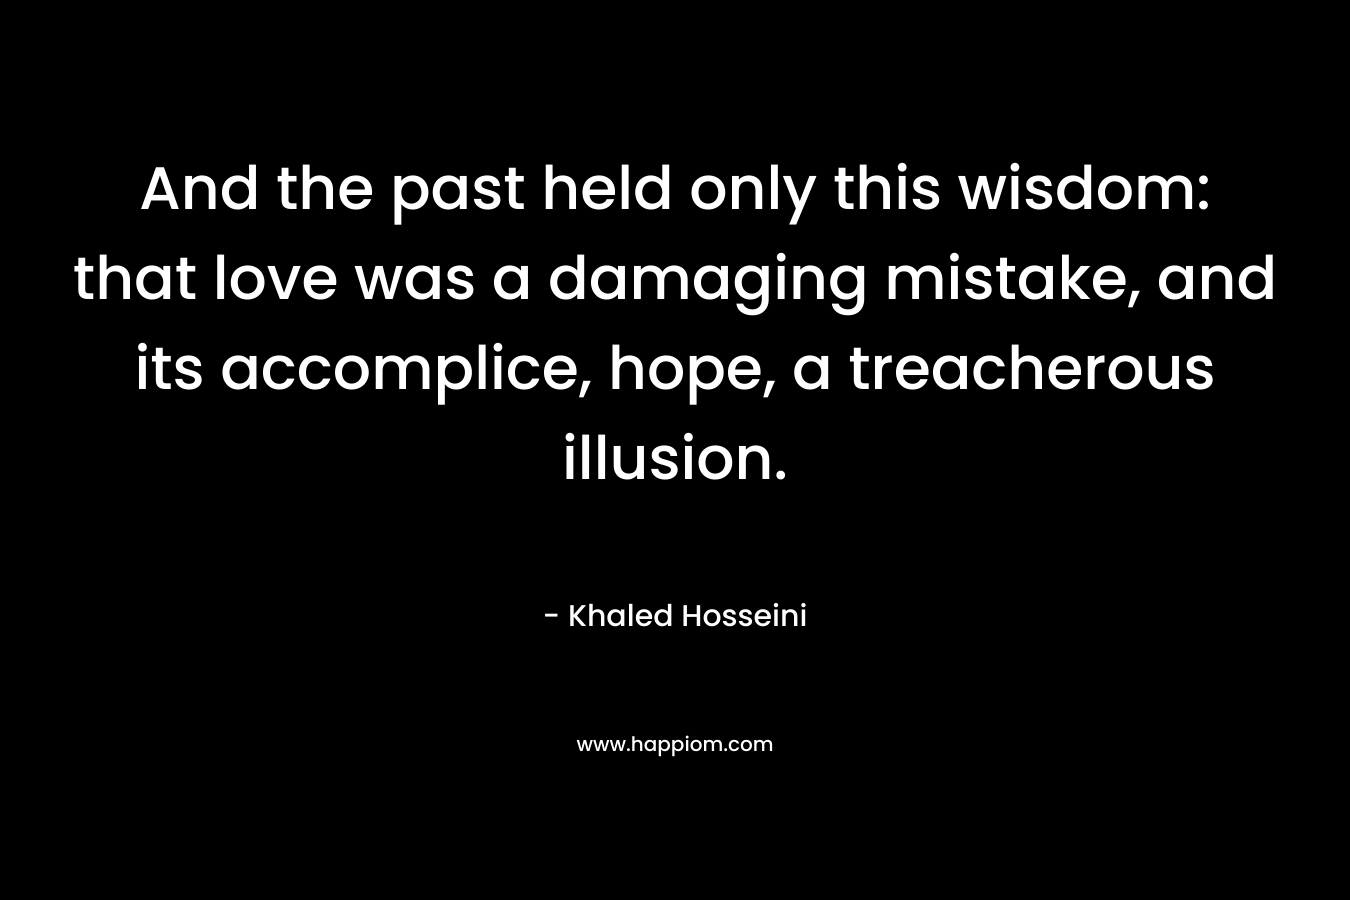 And the past held only this wisdom: that love was a damaging mistake, and its accomplice, hope, a treacherous illusion.